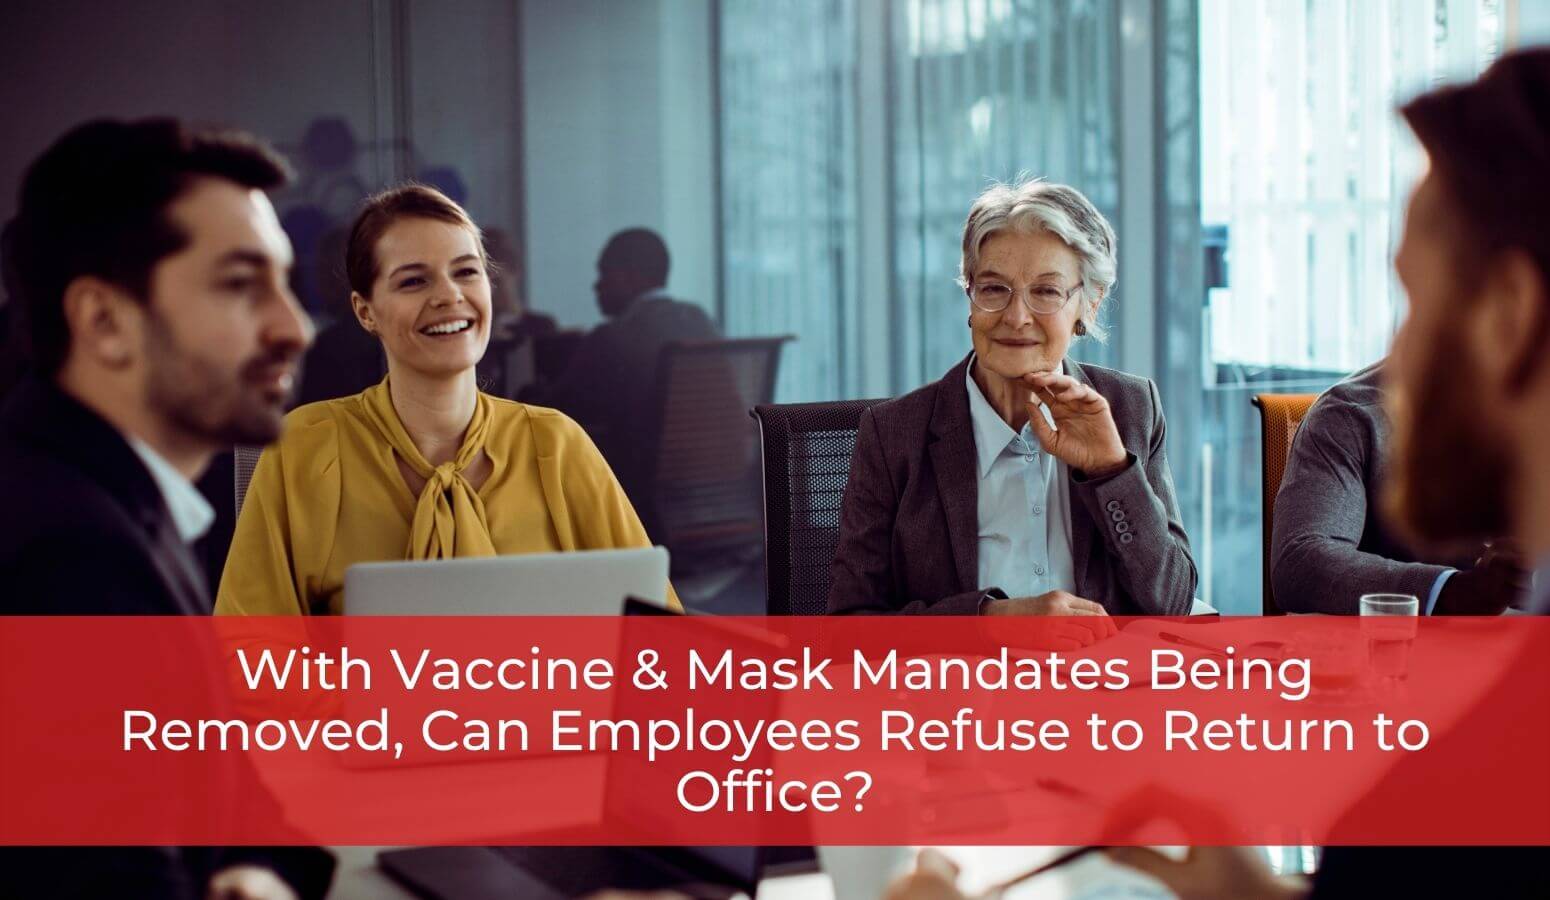 Featured image for “With Vaccine & Mask Mandates Being Removed, Can Employees Refuse to Return to Office?”